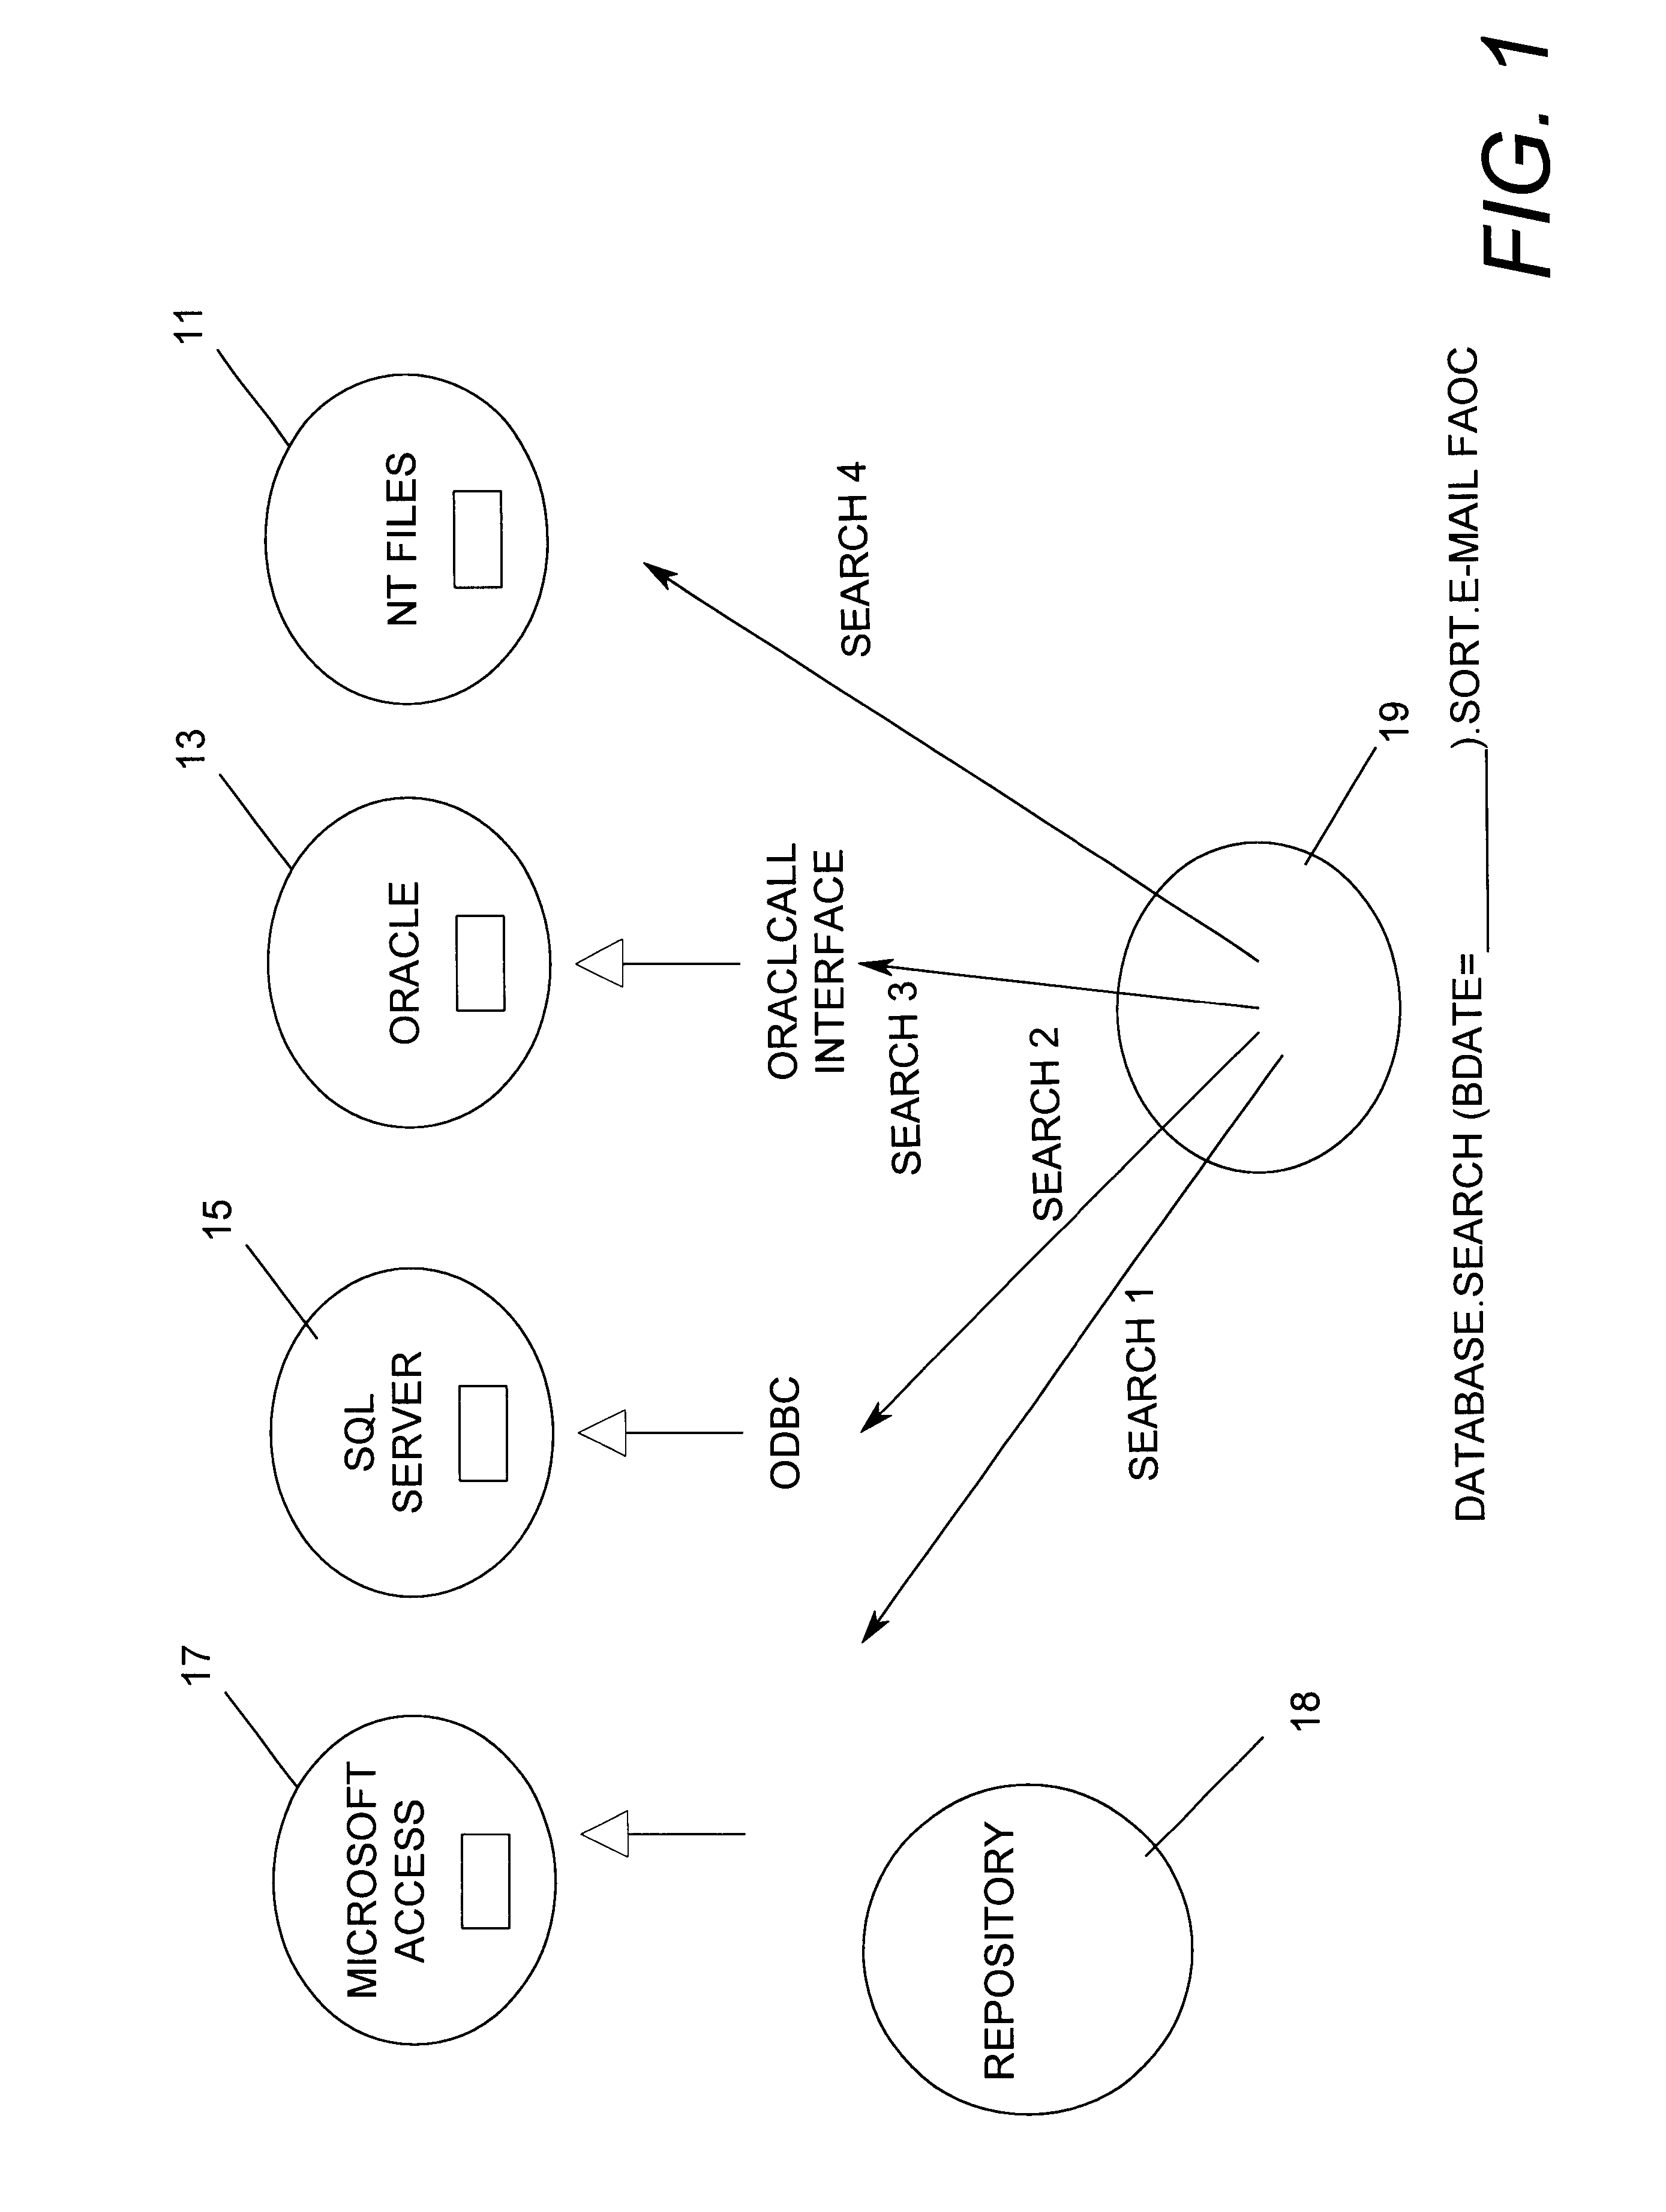 Method and apparatus for high speed parallel execution of multiple points of logic across heterogeneous data sources